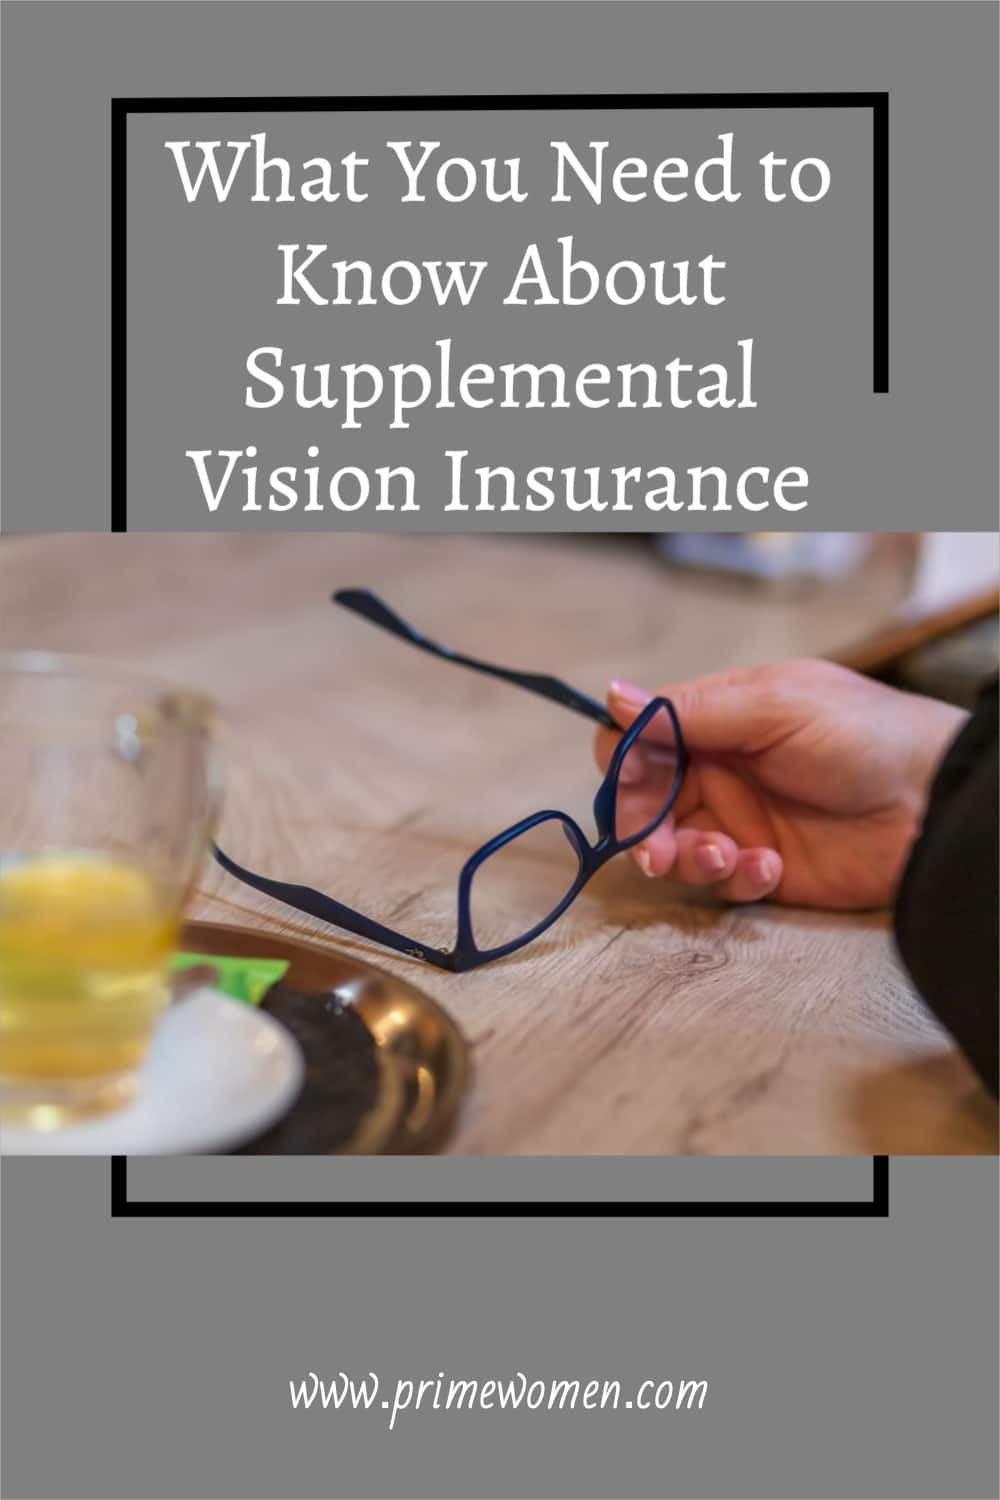 What you need to know about supplemental vision insurance